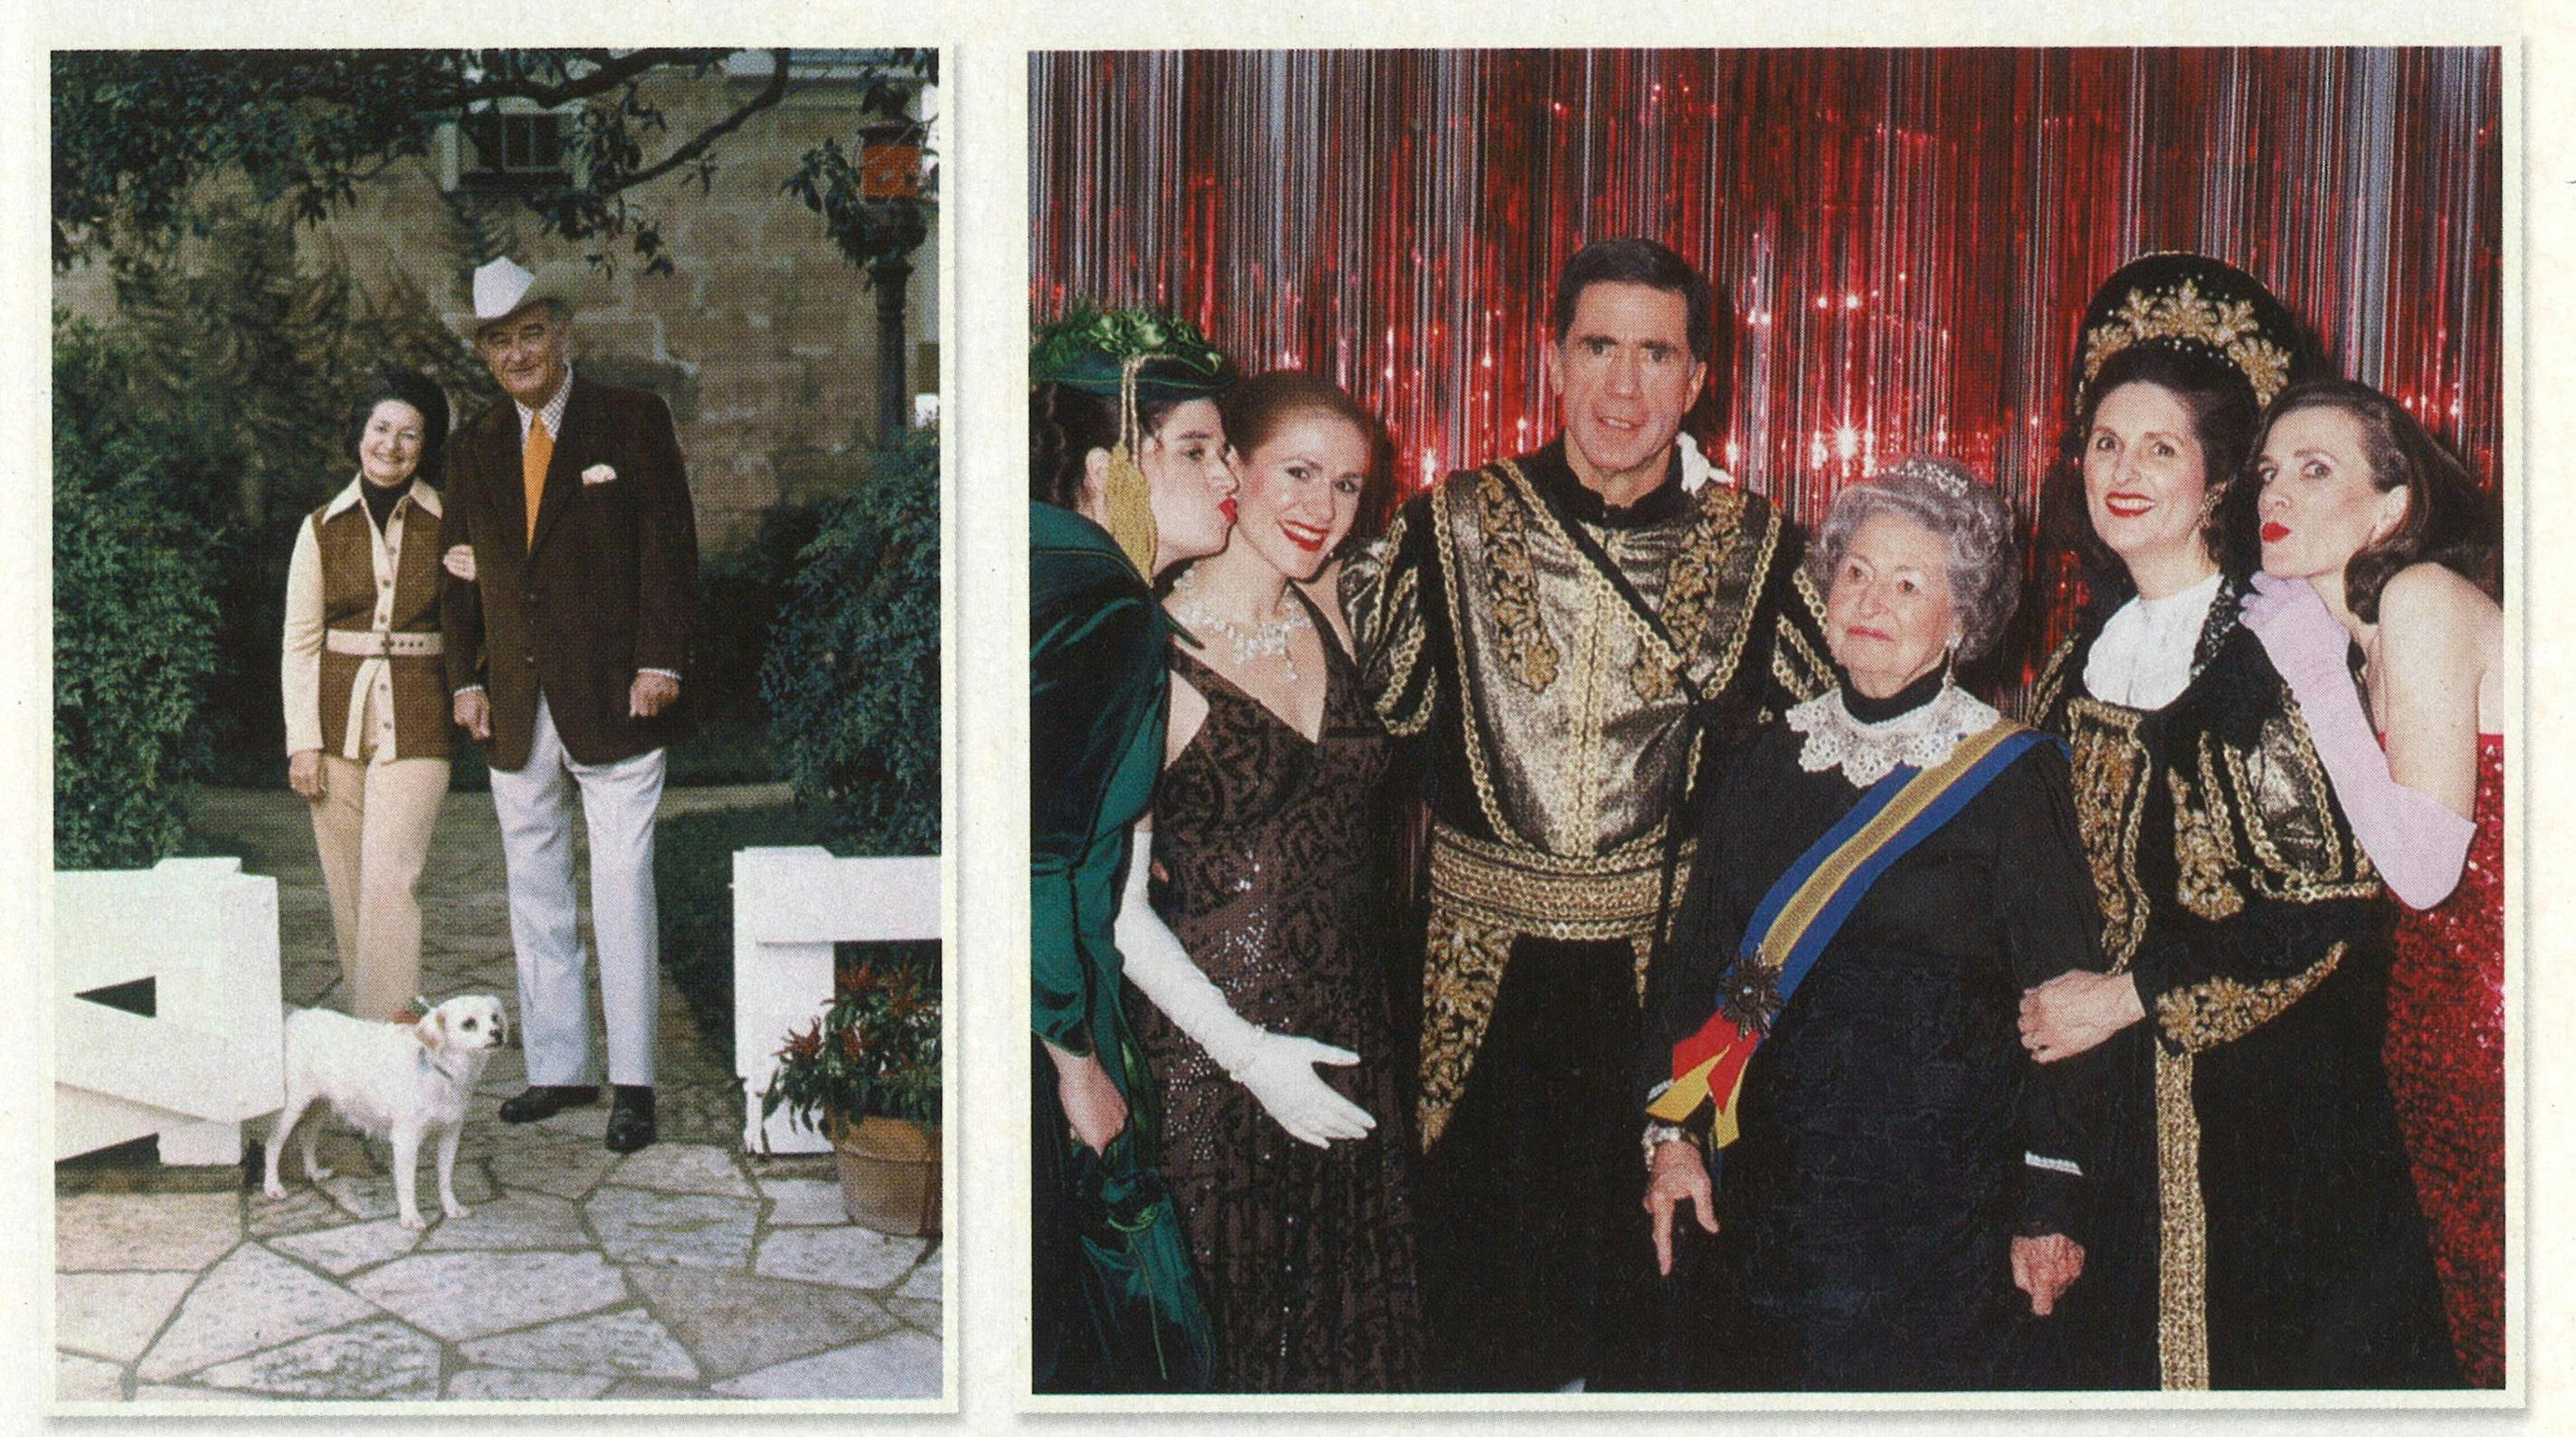 From left: The Johnsons at the ranch a few days before their thirty-eighth wedding anniversary, 1972. With (from left) granddaughters Jennifer and Lucinda Robb, son-in-law Charles Robb, daughter Lynda Robb, and granddaughter Catherine Robb at a costume party in 2003.